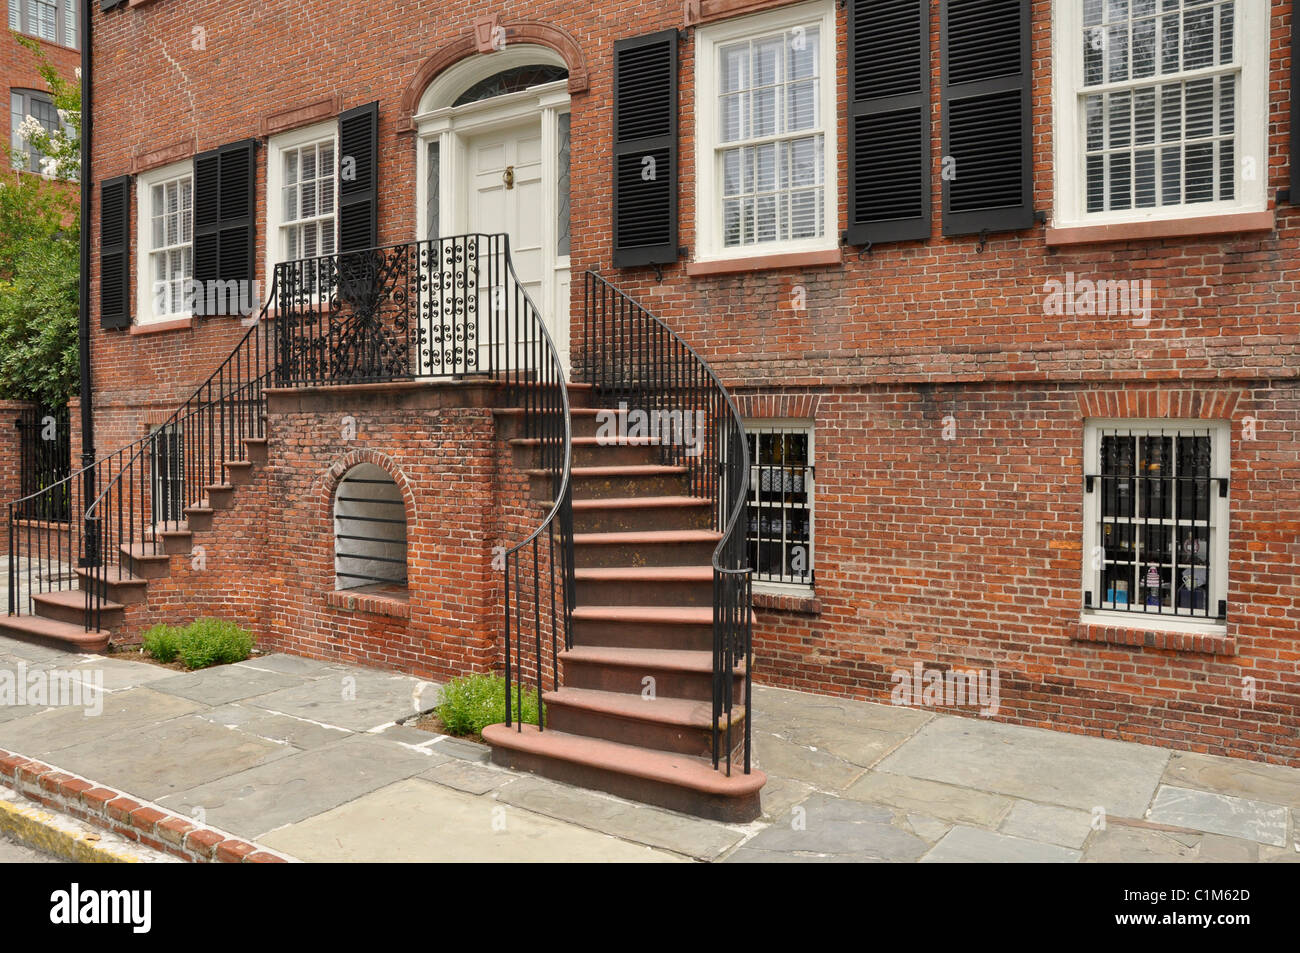 Exterior of an old red brick home with a staircase.  The home is in Savannah, Georgia. Stock Photo